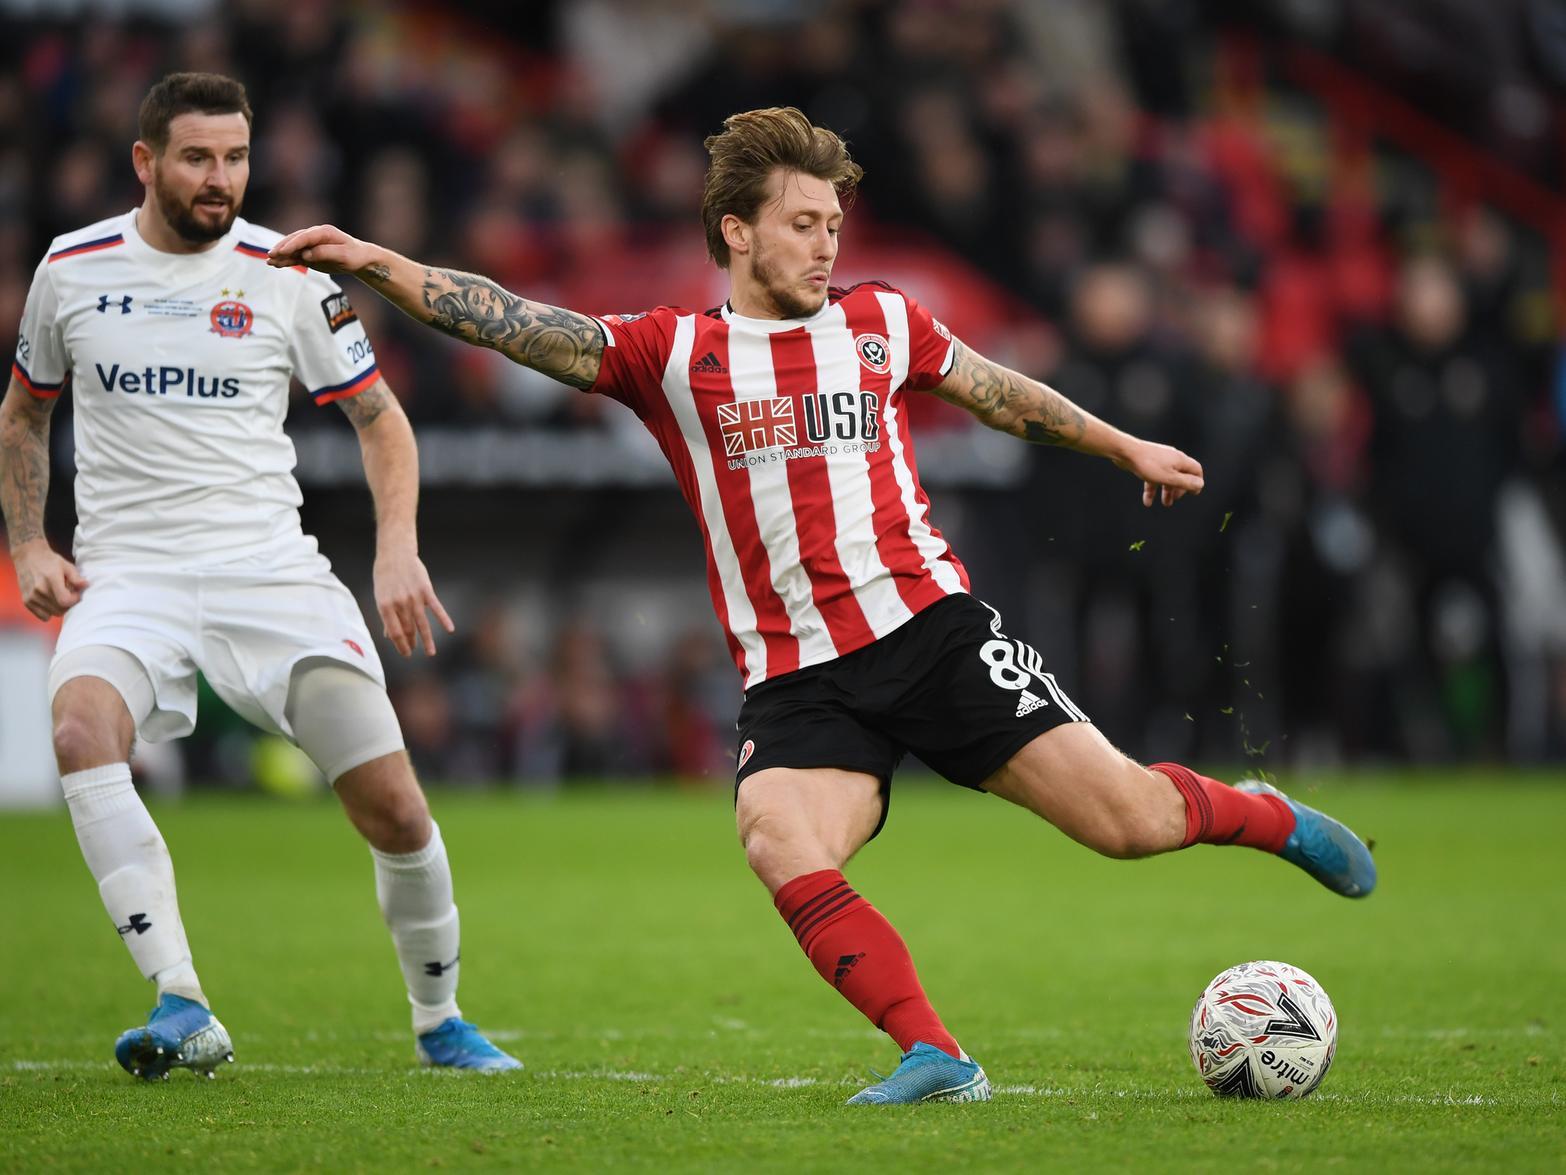 Nottingham Forest look to be moving closer to sealing a loan move for Sheffield United's 5m man Luke Freeman, but the deal is said to hinge on whether the Blades can tie up a deal for Genk's Sander Berge. (Football Insider)